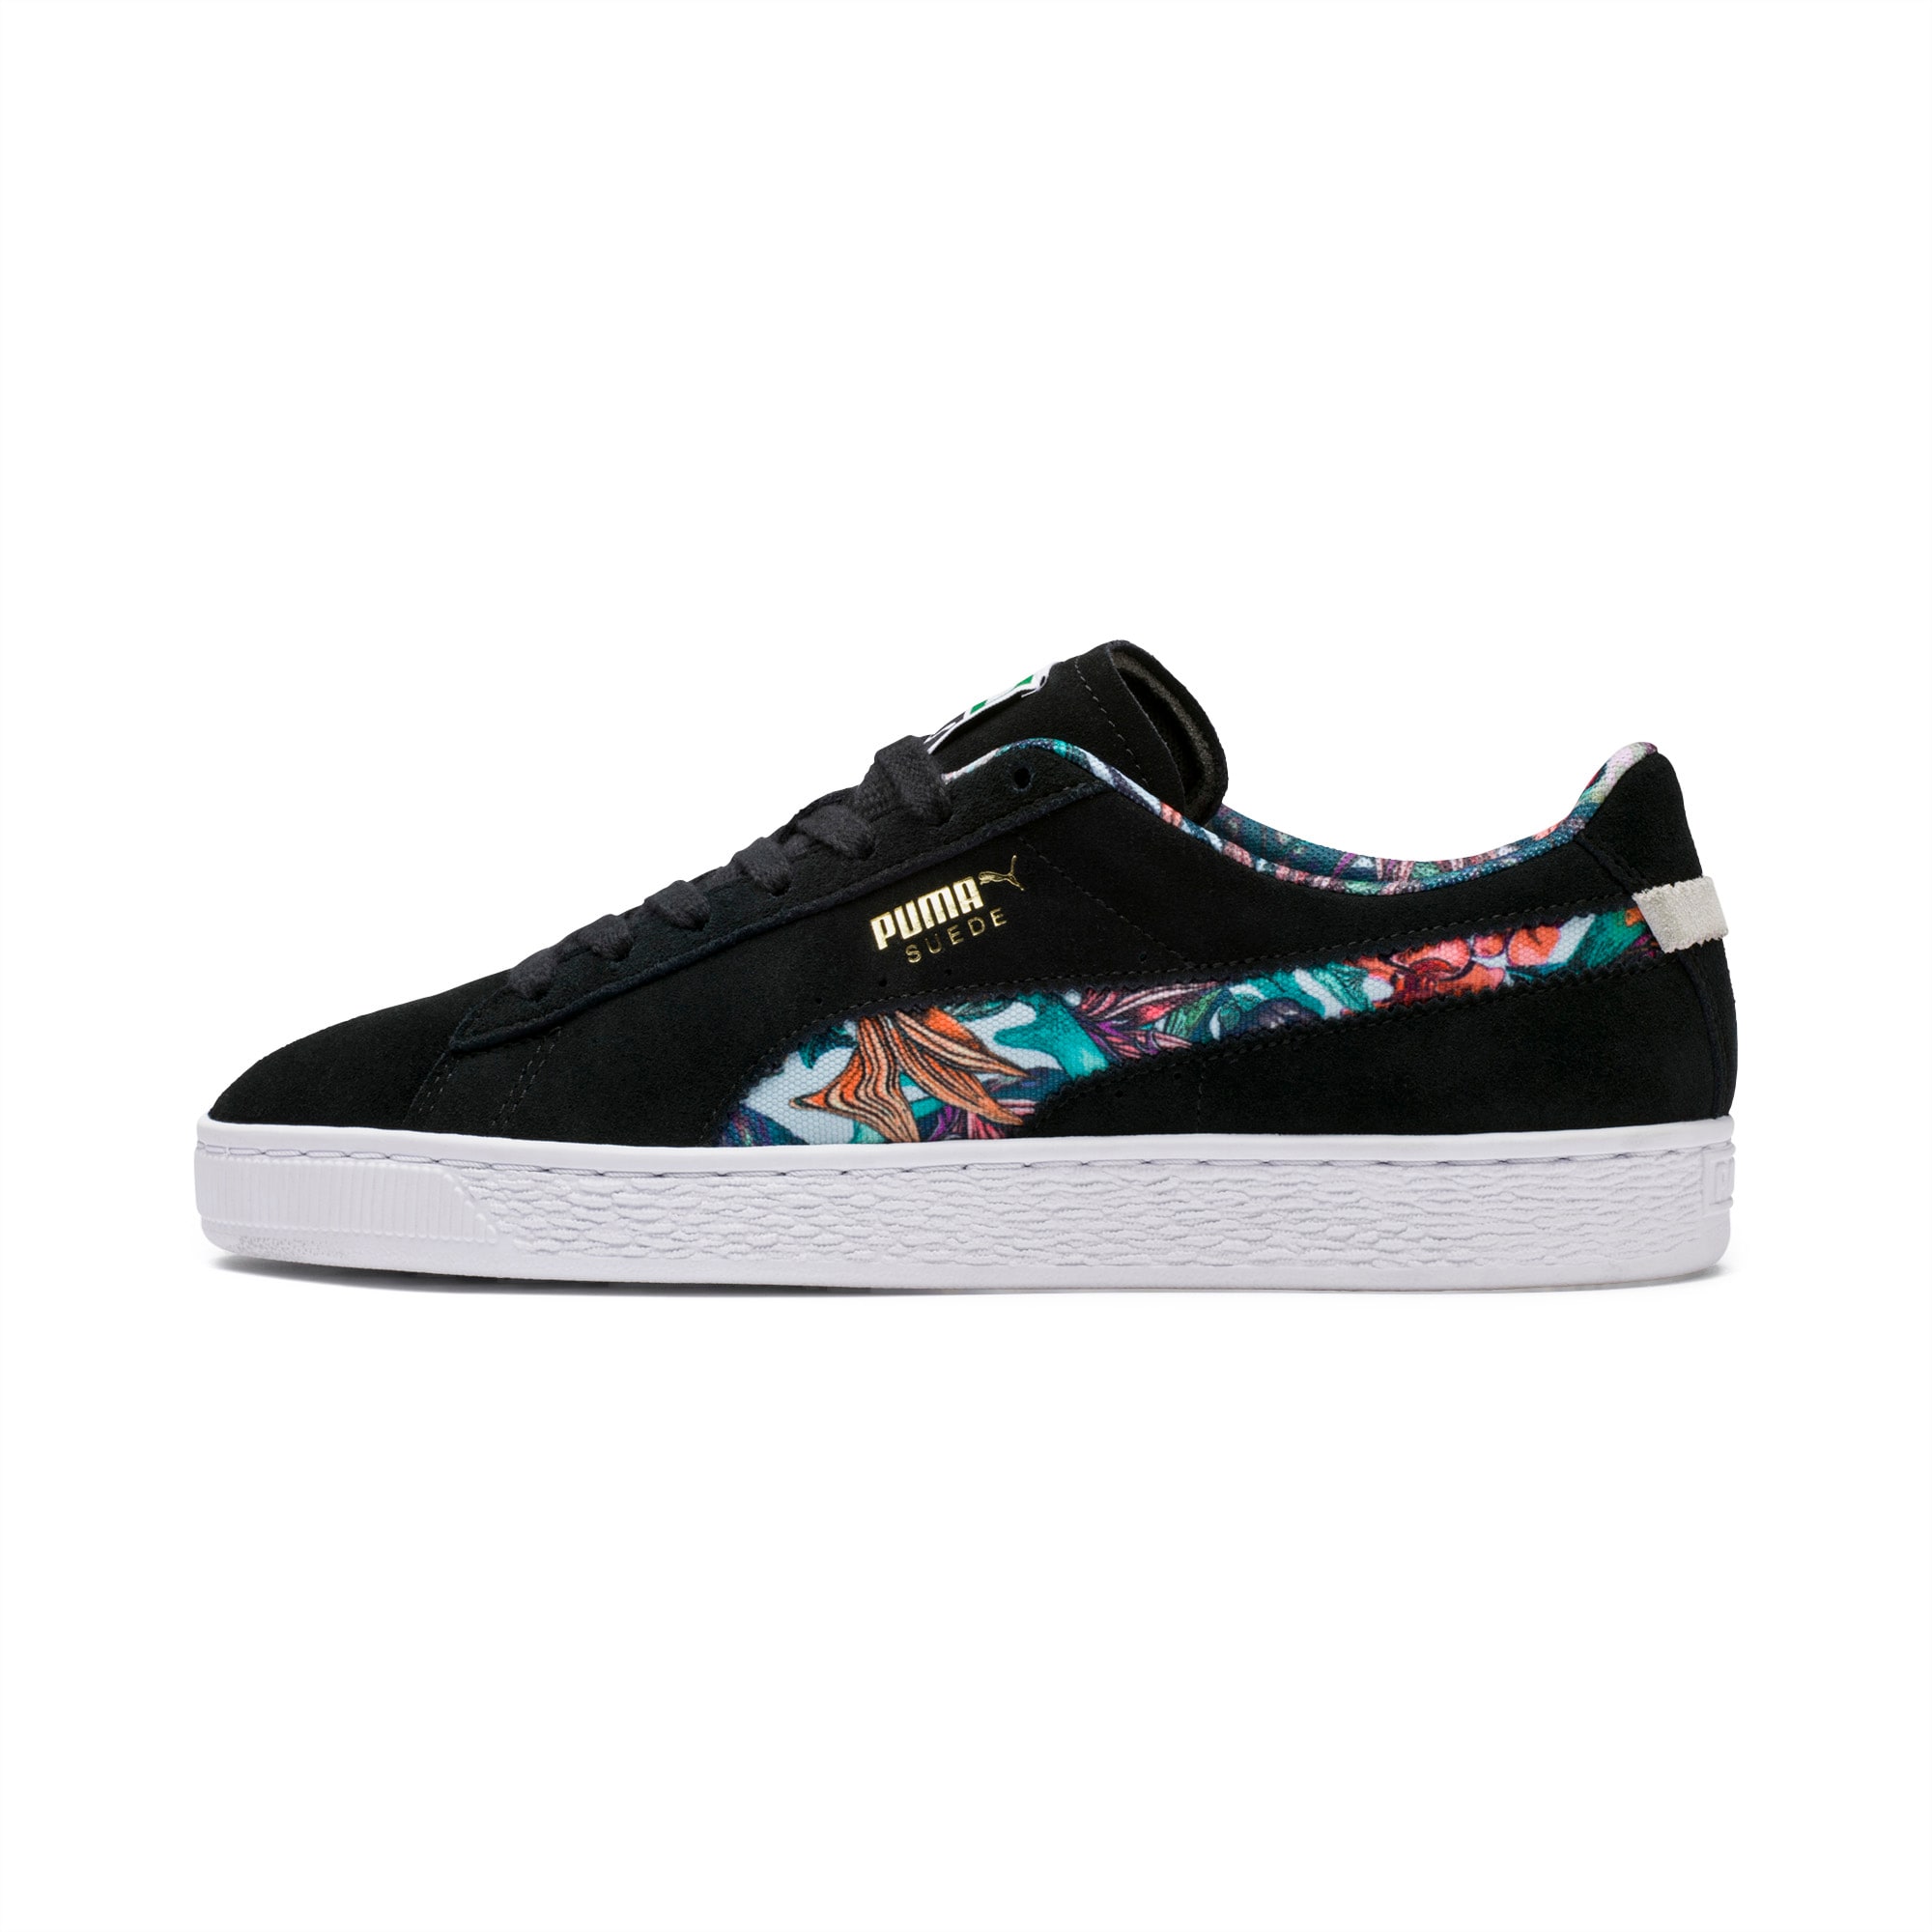 puma suede with flowers